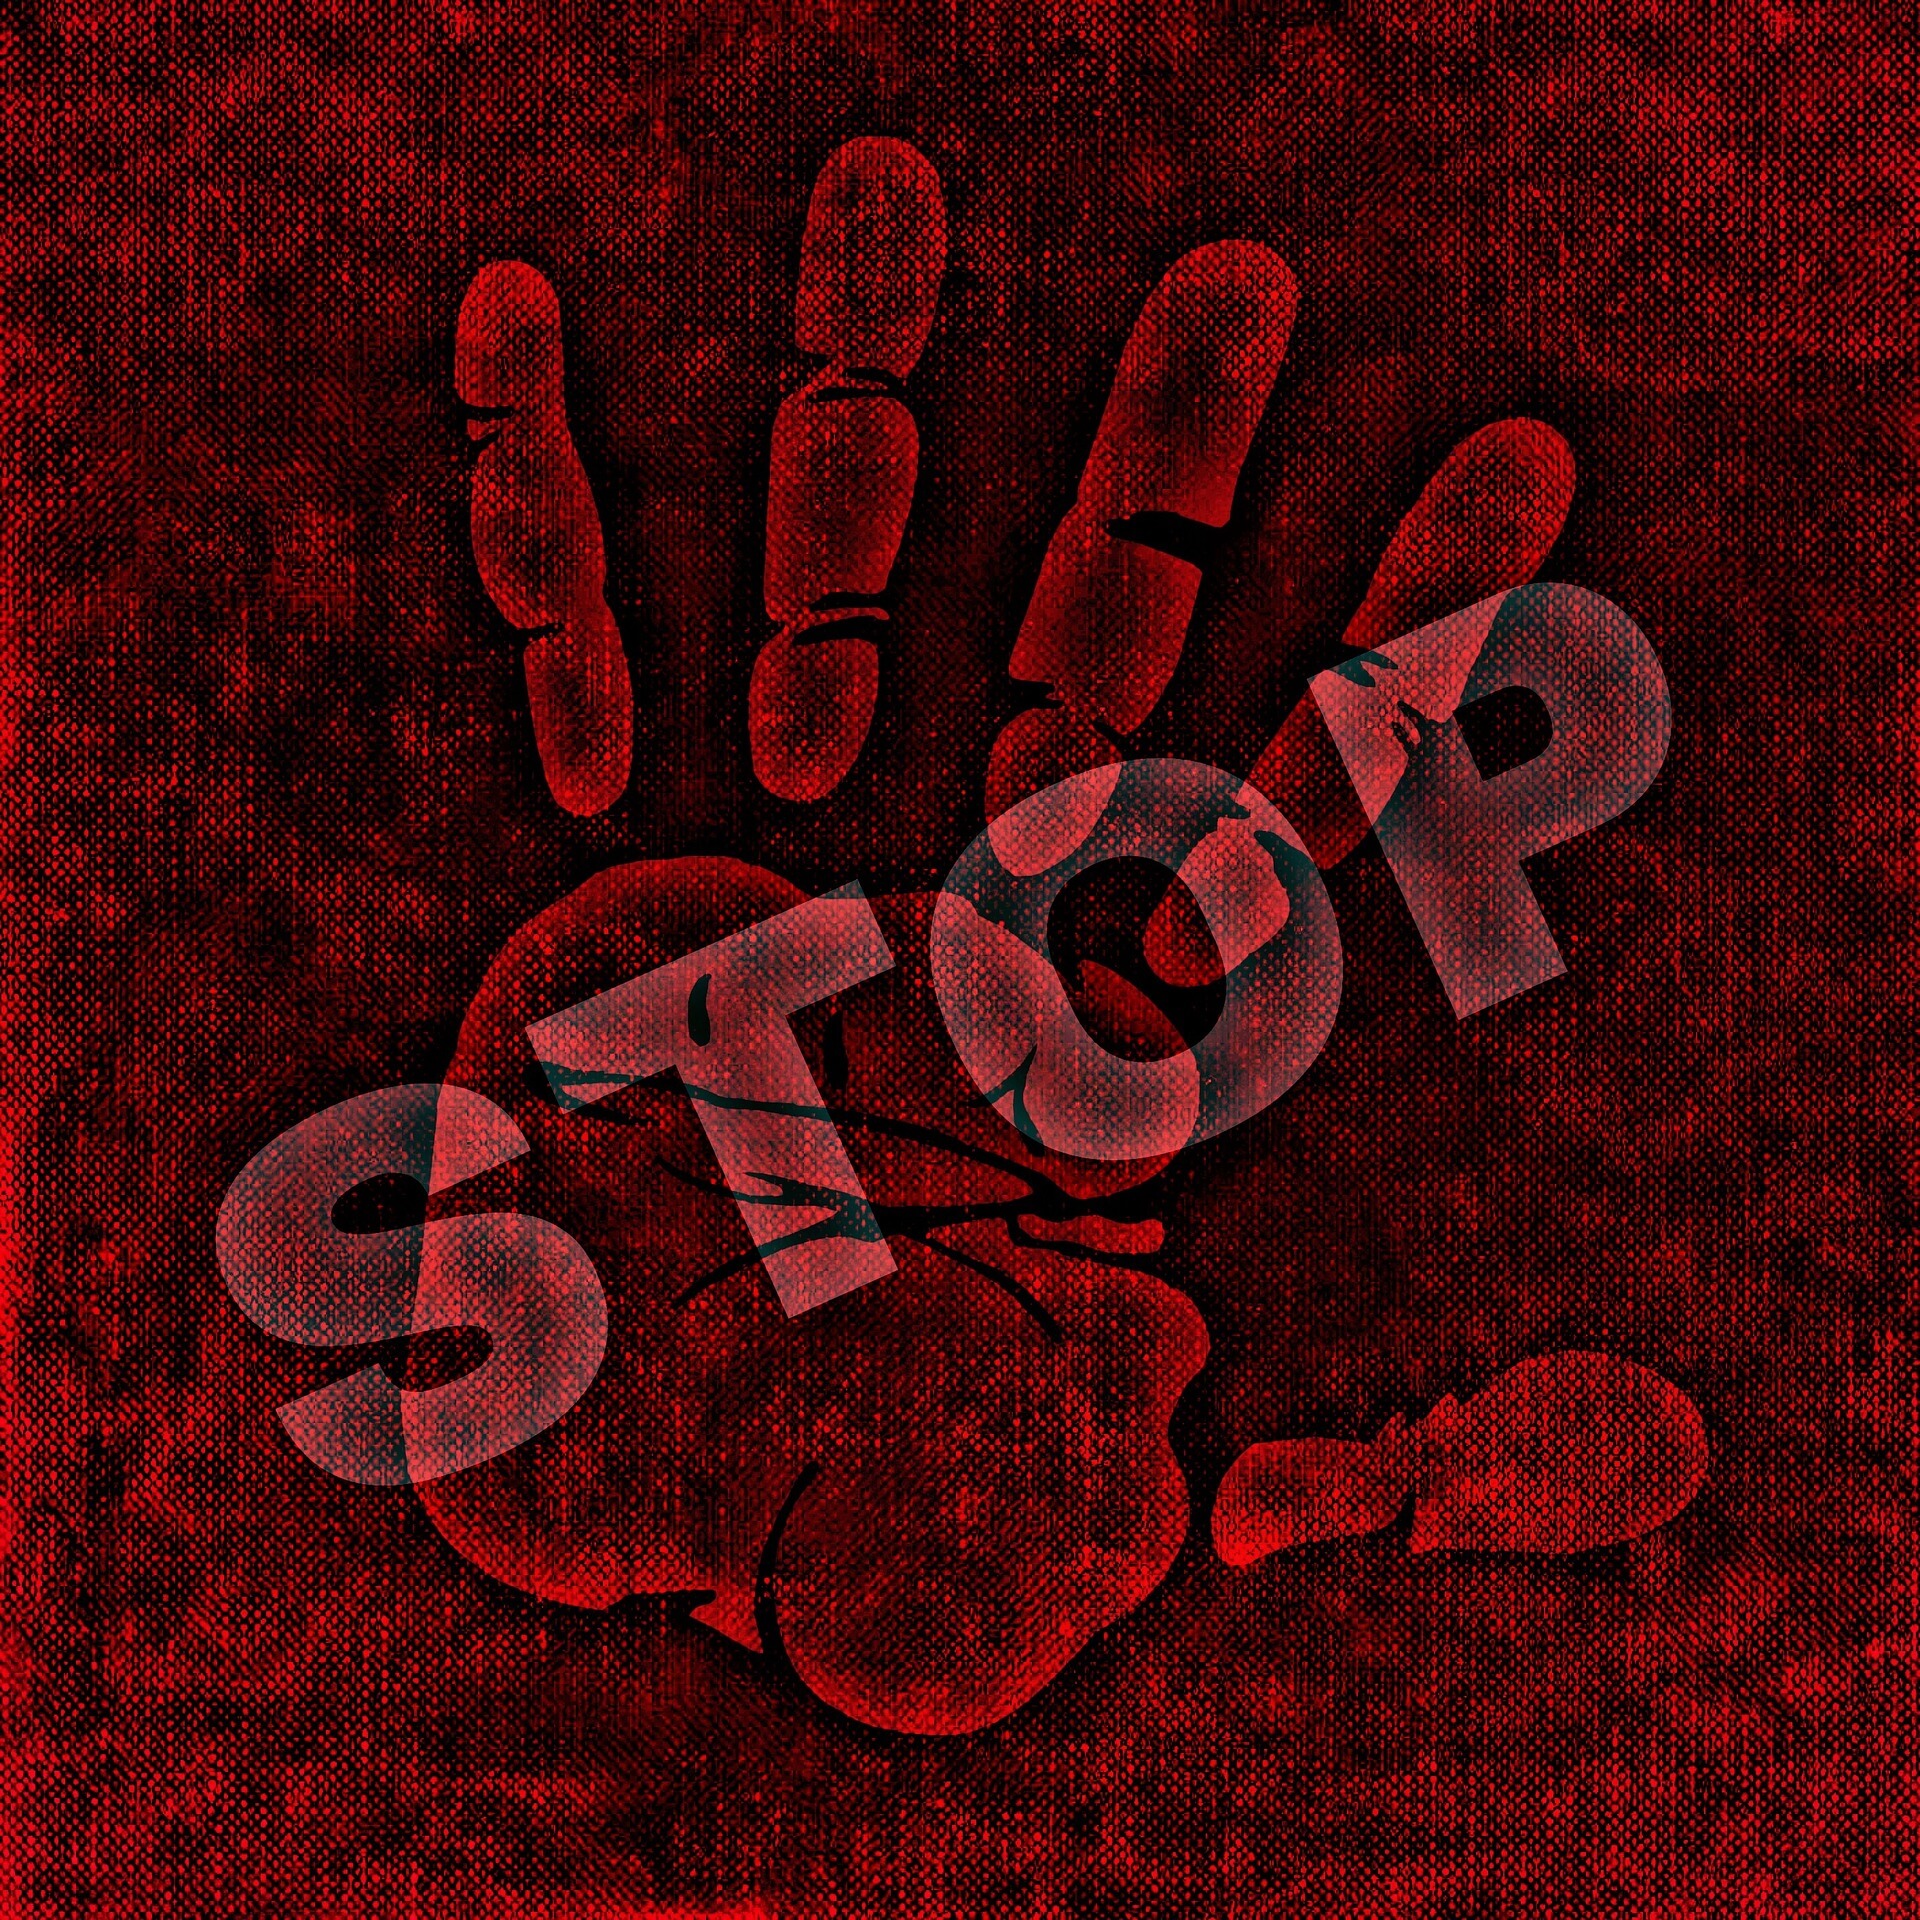 alt="red hand with stop written across"